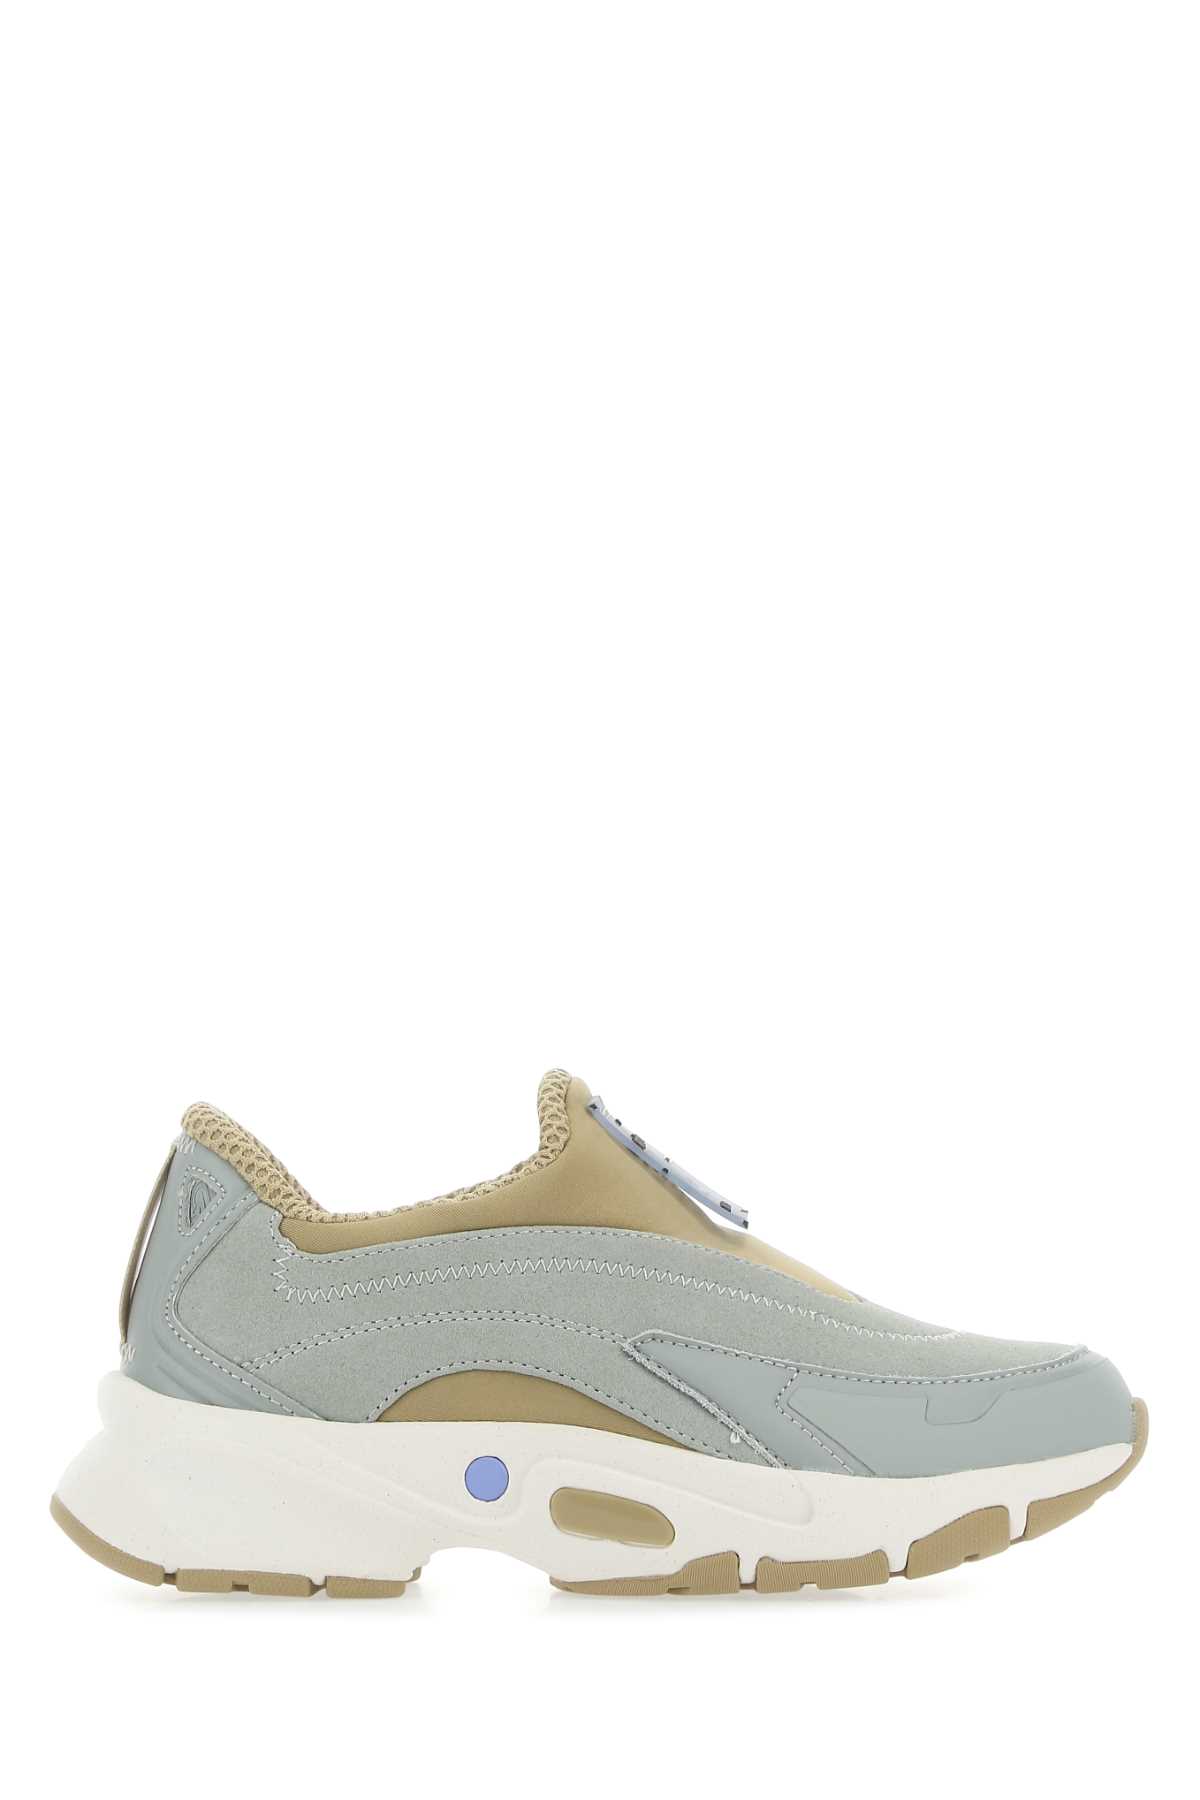 Shop Mcq By Alexander Mcqueen Multicolor Fabric And Suede Aratana 2.0 Slip Ons In 1401